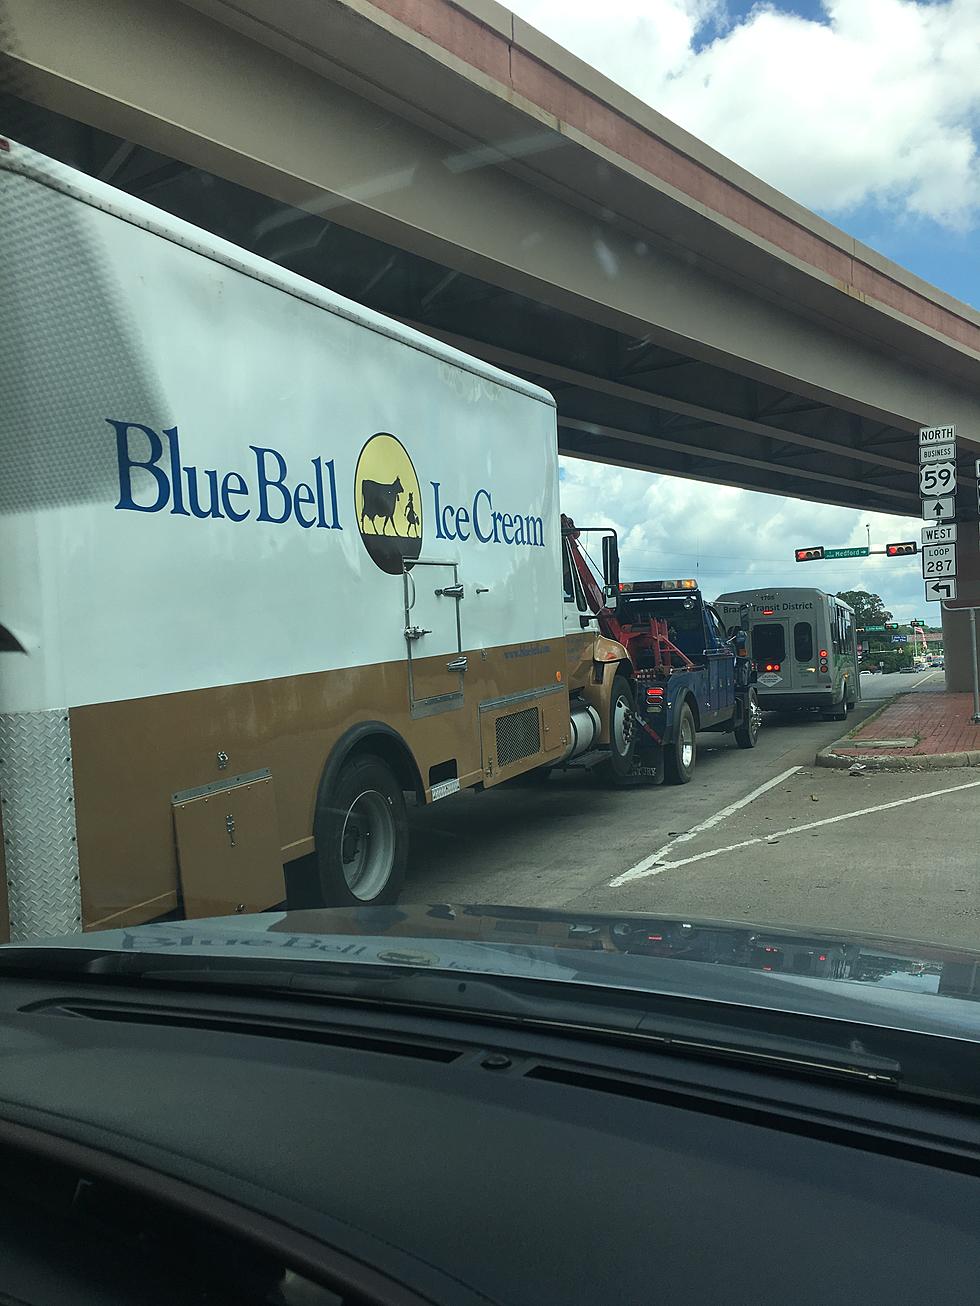 Bad Times For Blue Bell? The Sight We Saw Today